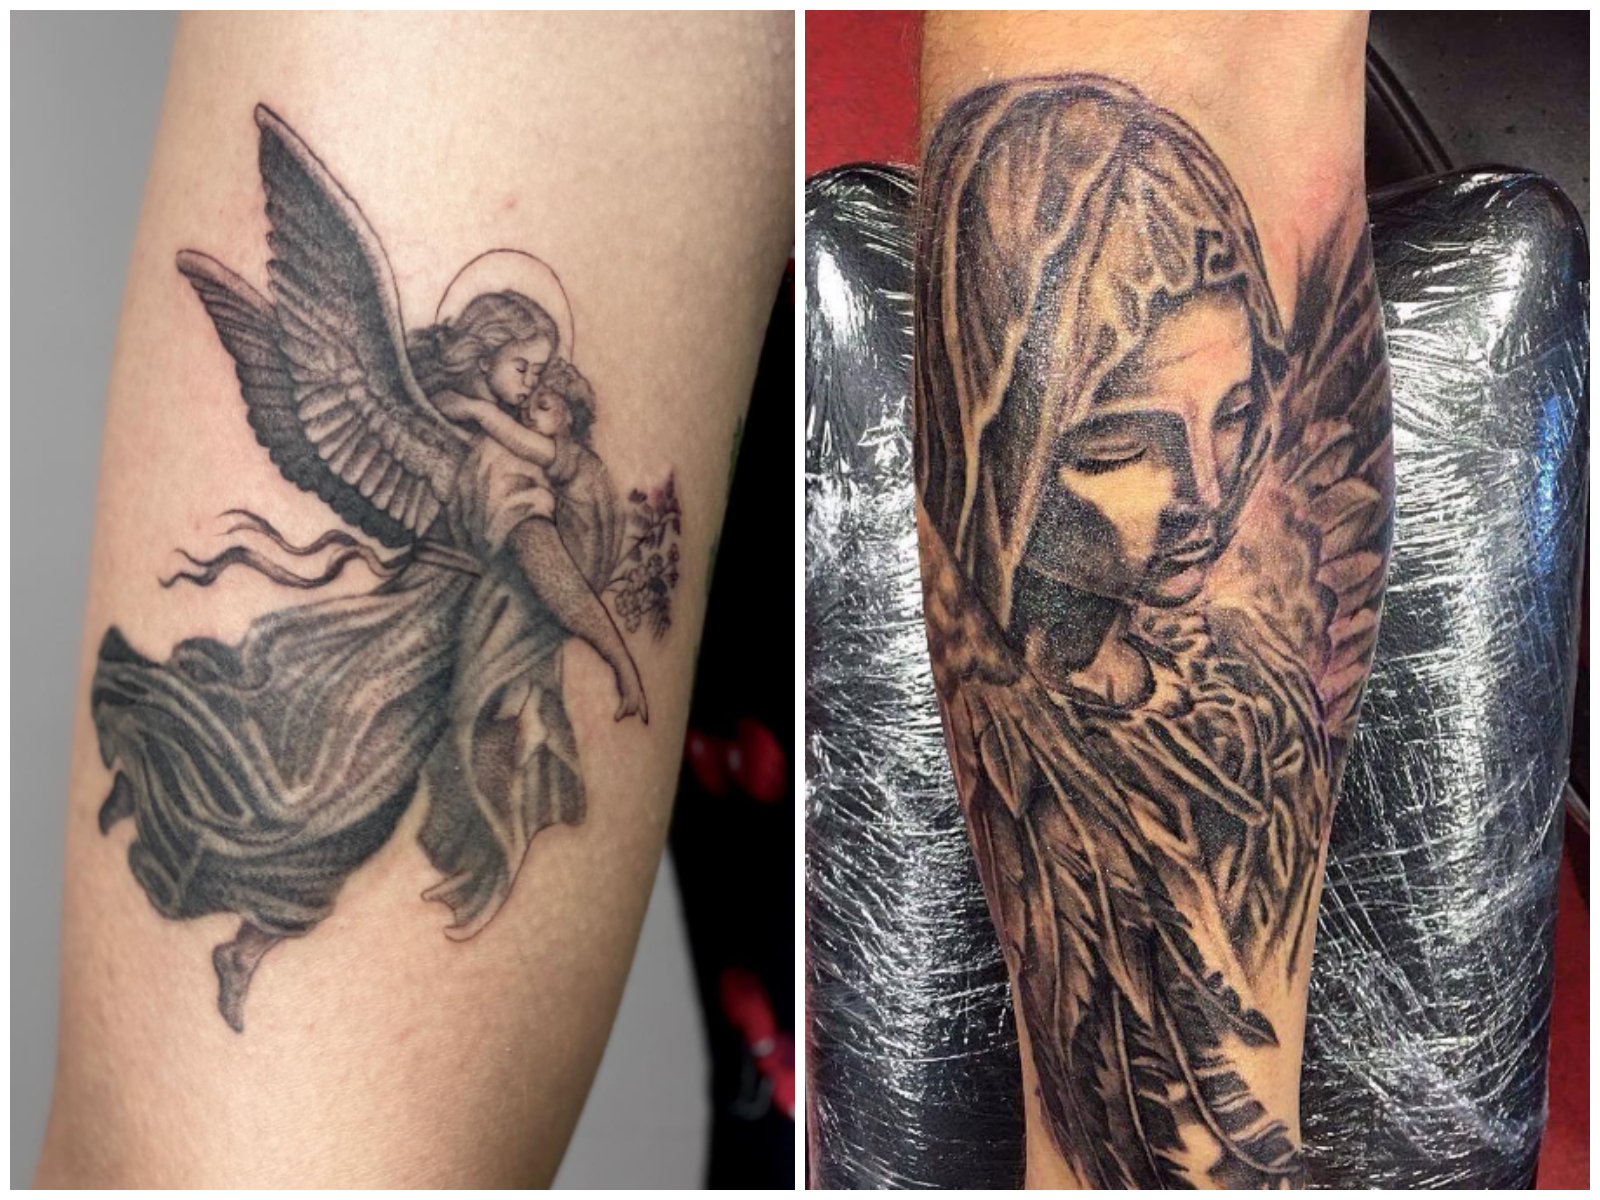 mom and son tattoos